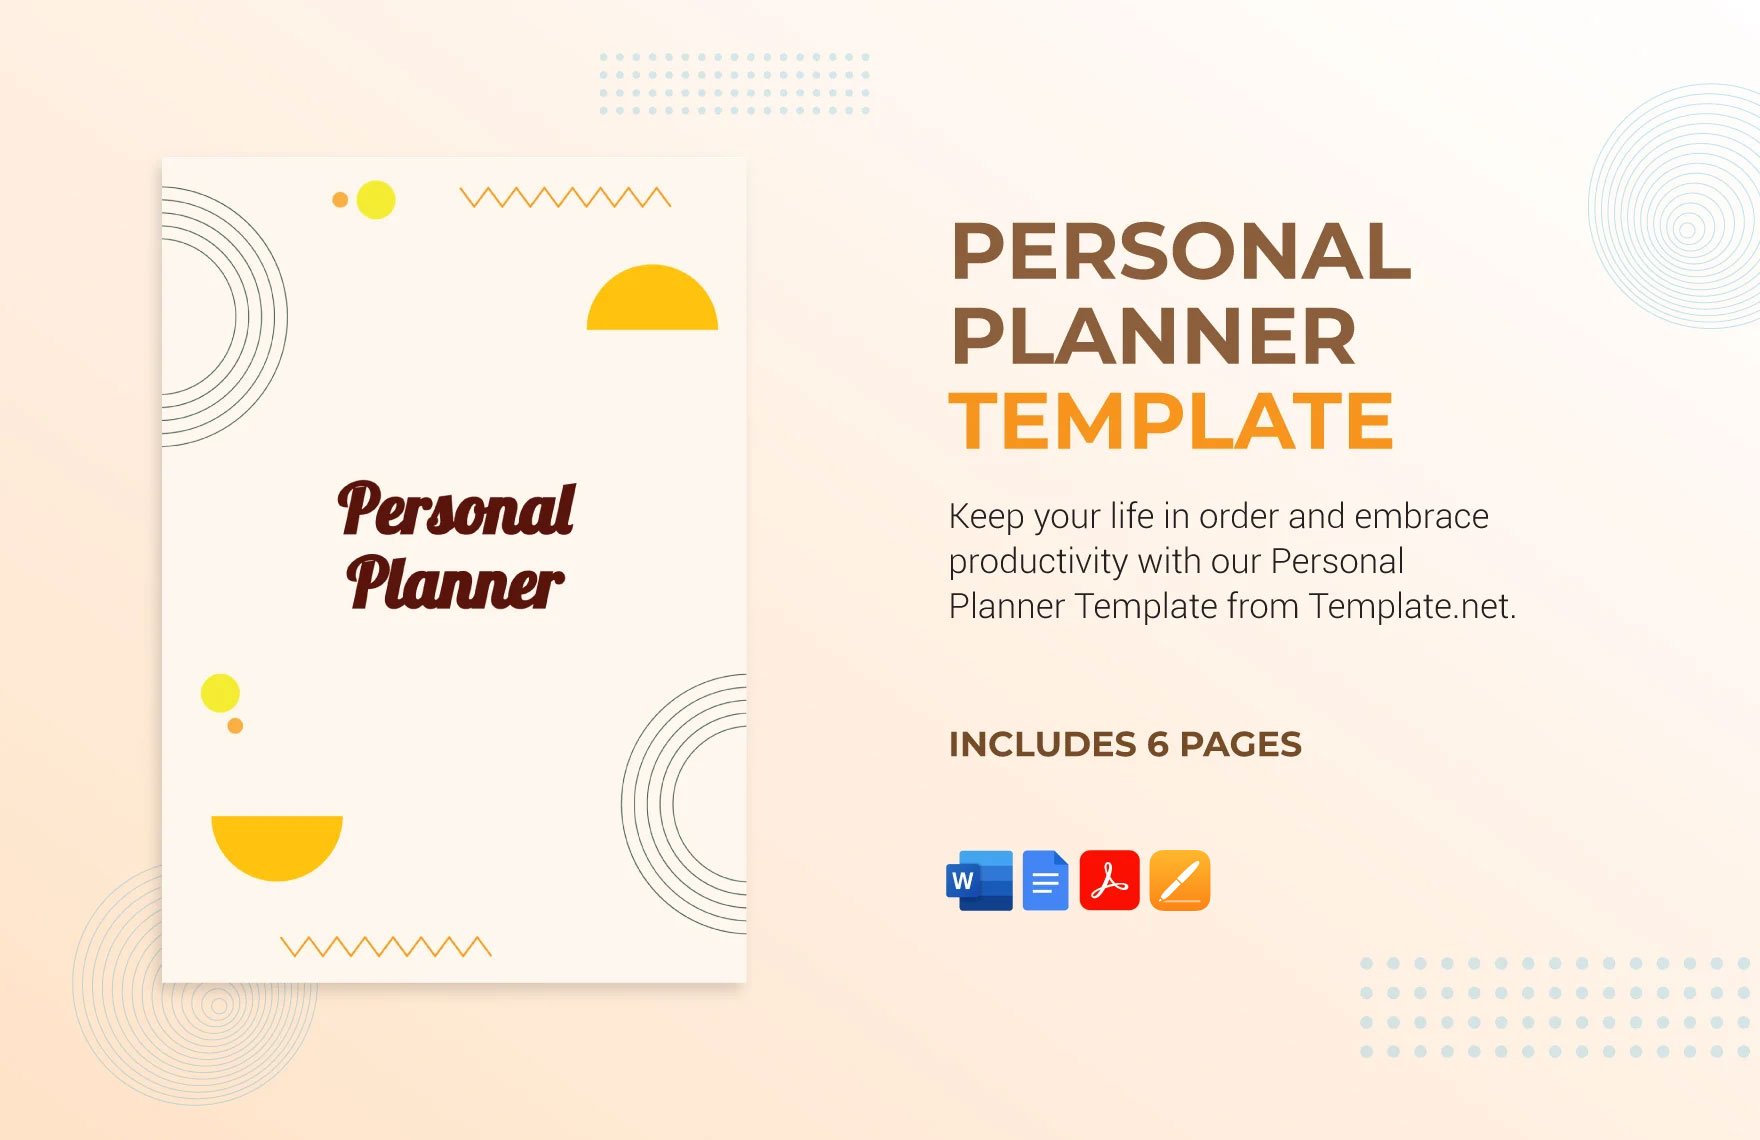 Personal Planner Template in Word, Google Docs, PDF, Apple Pages